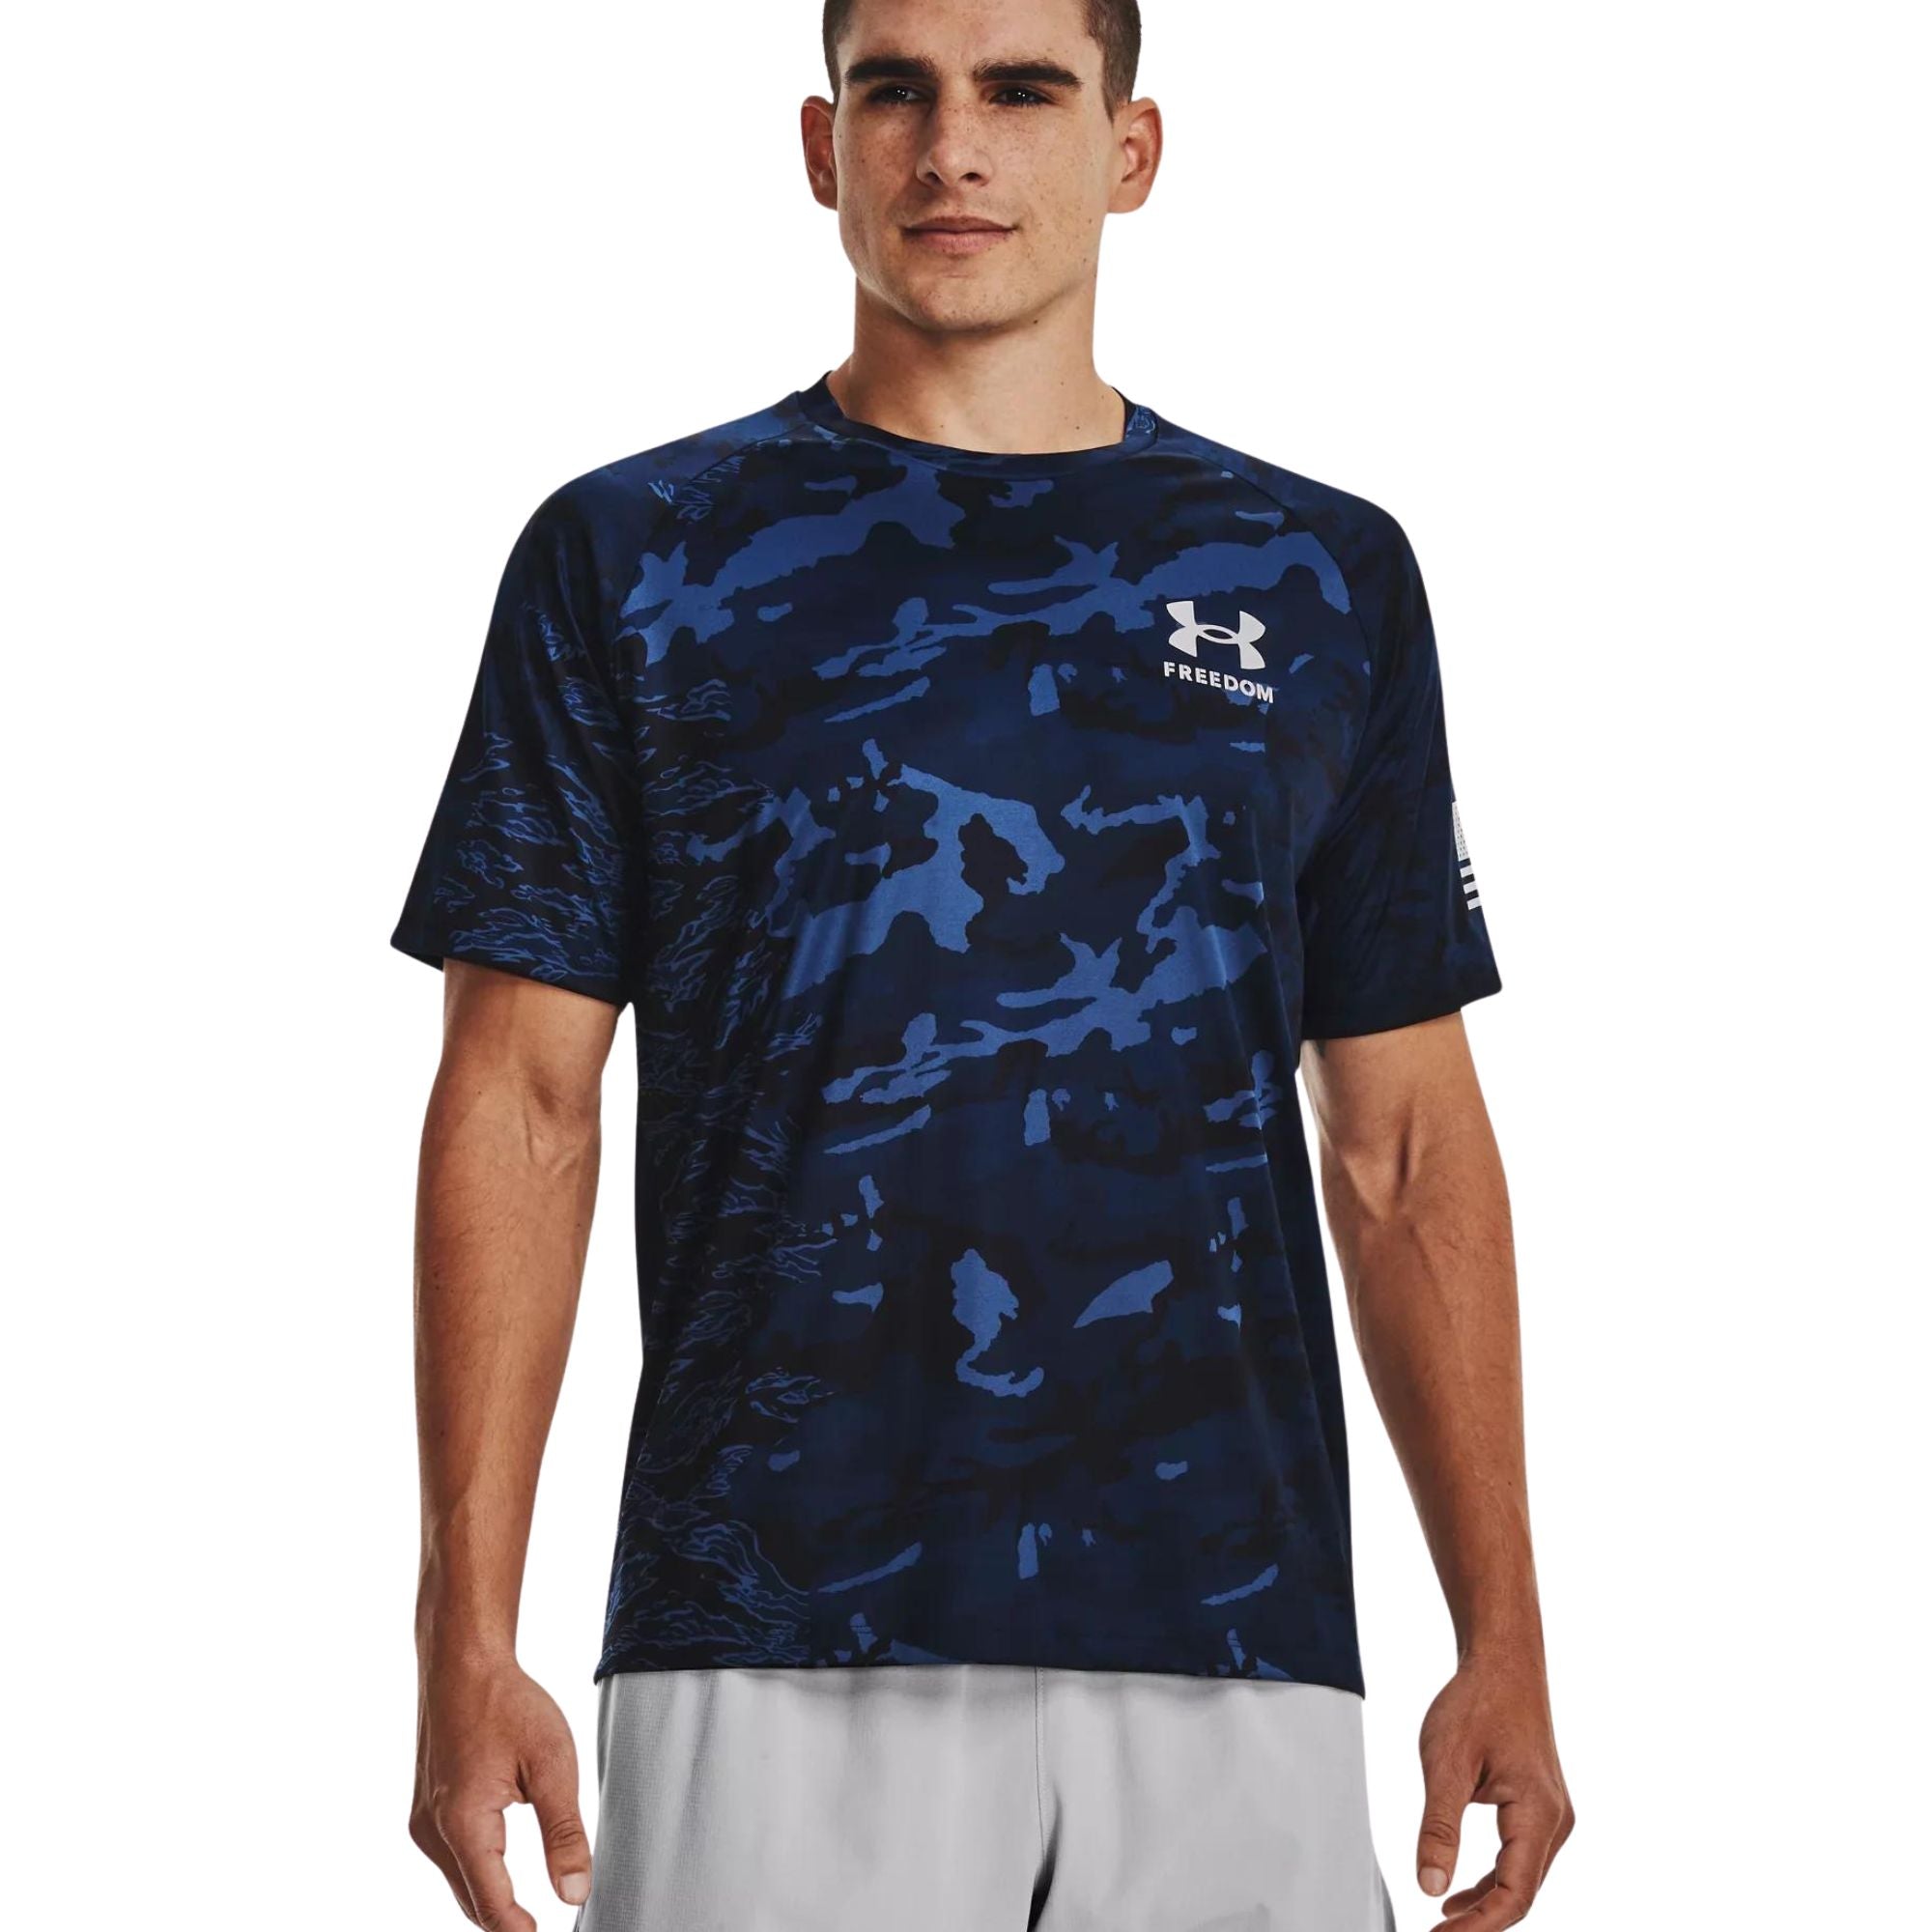 Under Armour Freedom Tech SS Camo T-Shirt (Navy), MD